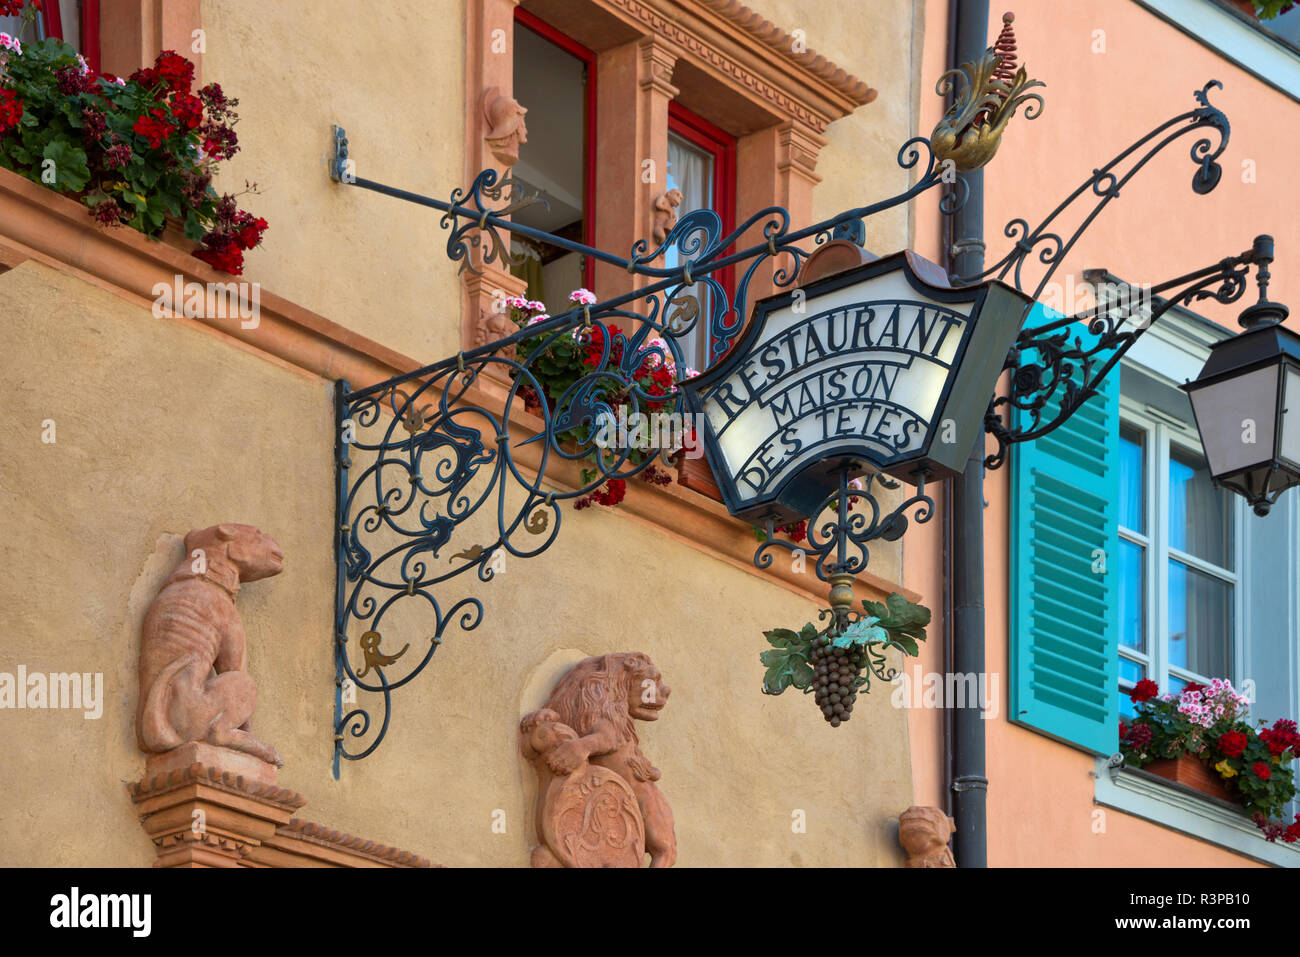 France, Alsace, Colmar. Entrance sign for a restaurant in the famous Maison des Tetes (House of Heads) building. Stock Photo